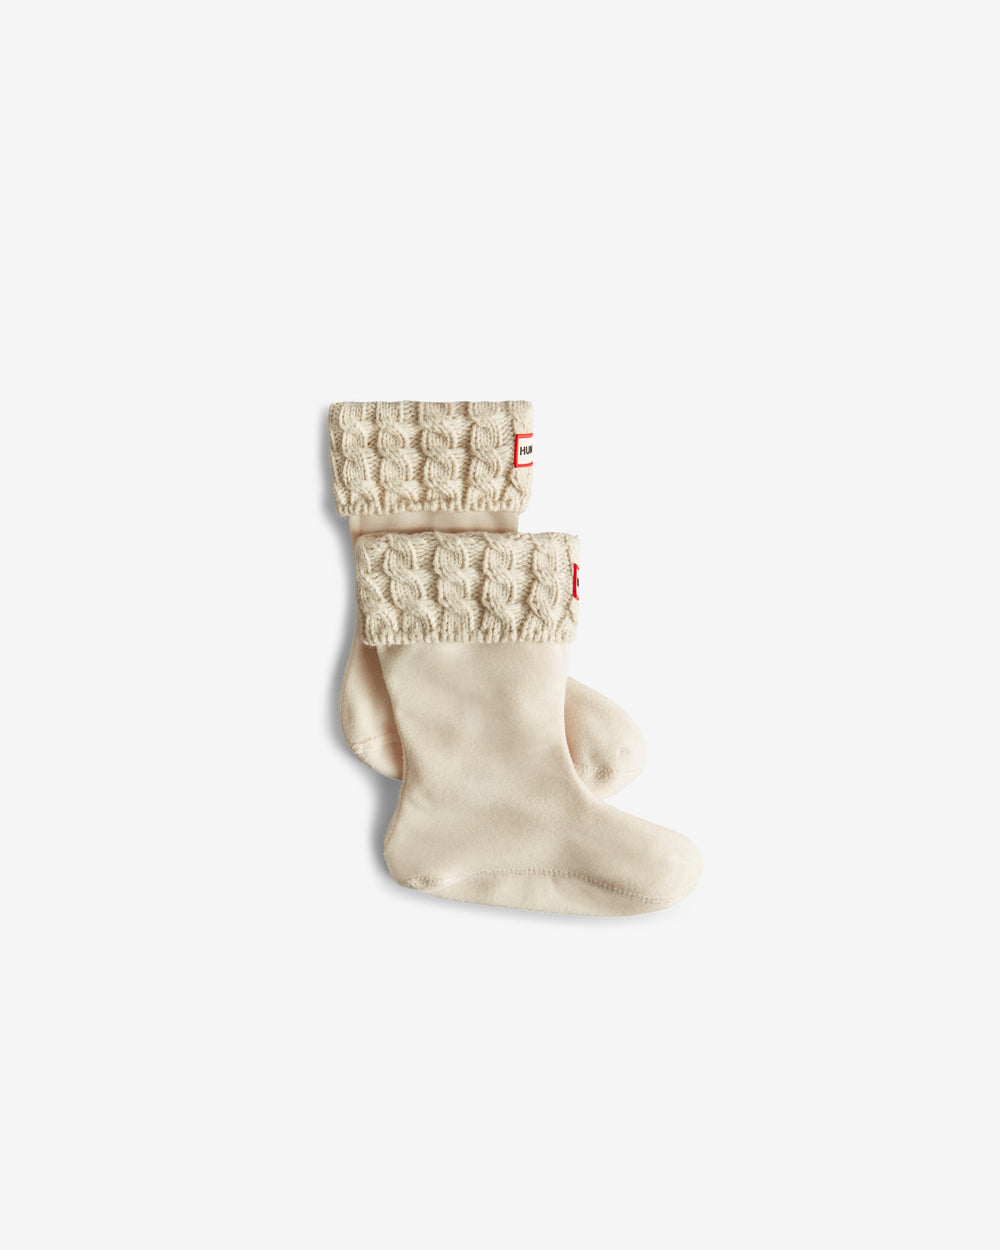 Kids Recycled 6 Stitch Cable Boot Socks